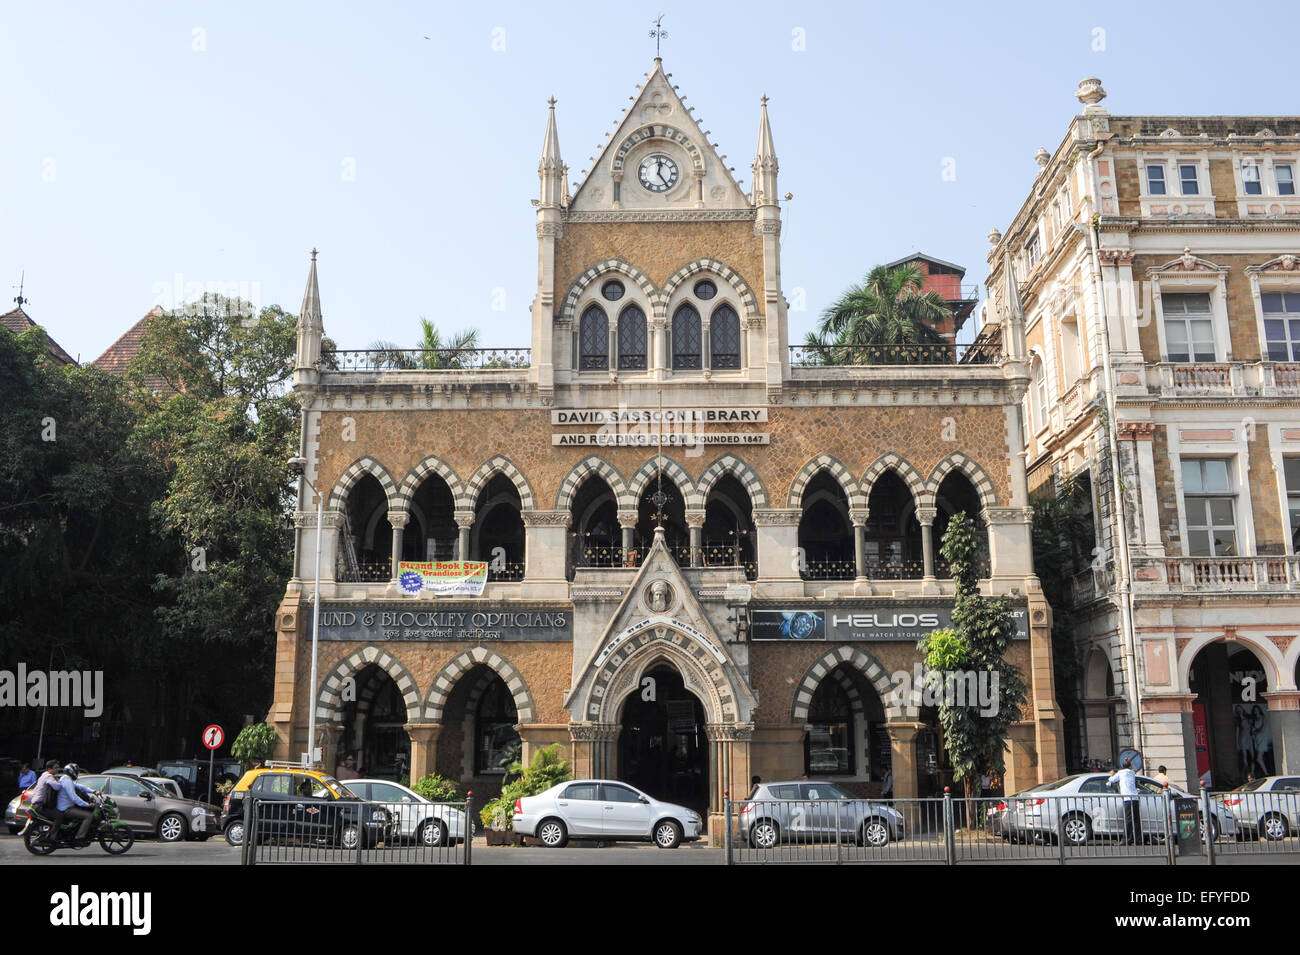 MUMBAI, INDIA - JANUARY 5, 2015 - The David Sassoon Library is the name of a famous library and is a heritage structure at Mumba Stock Photo